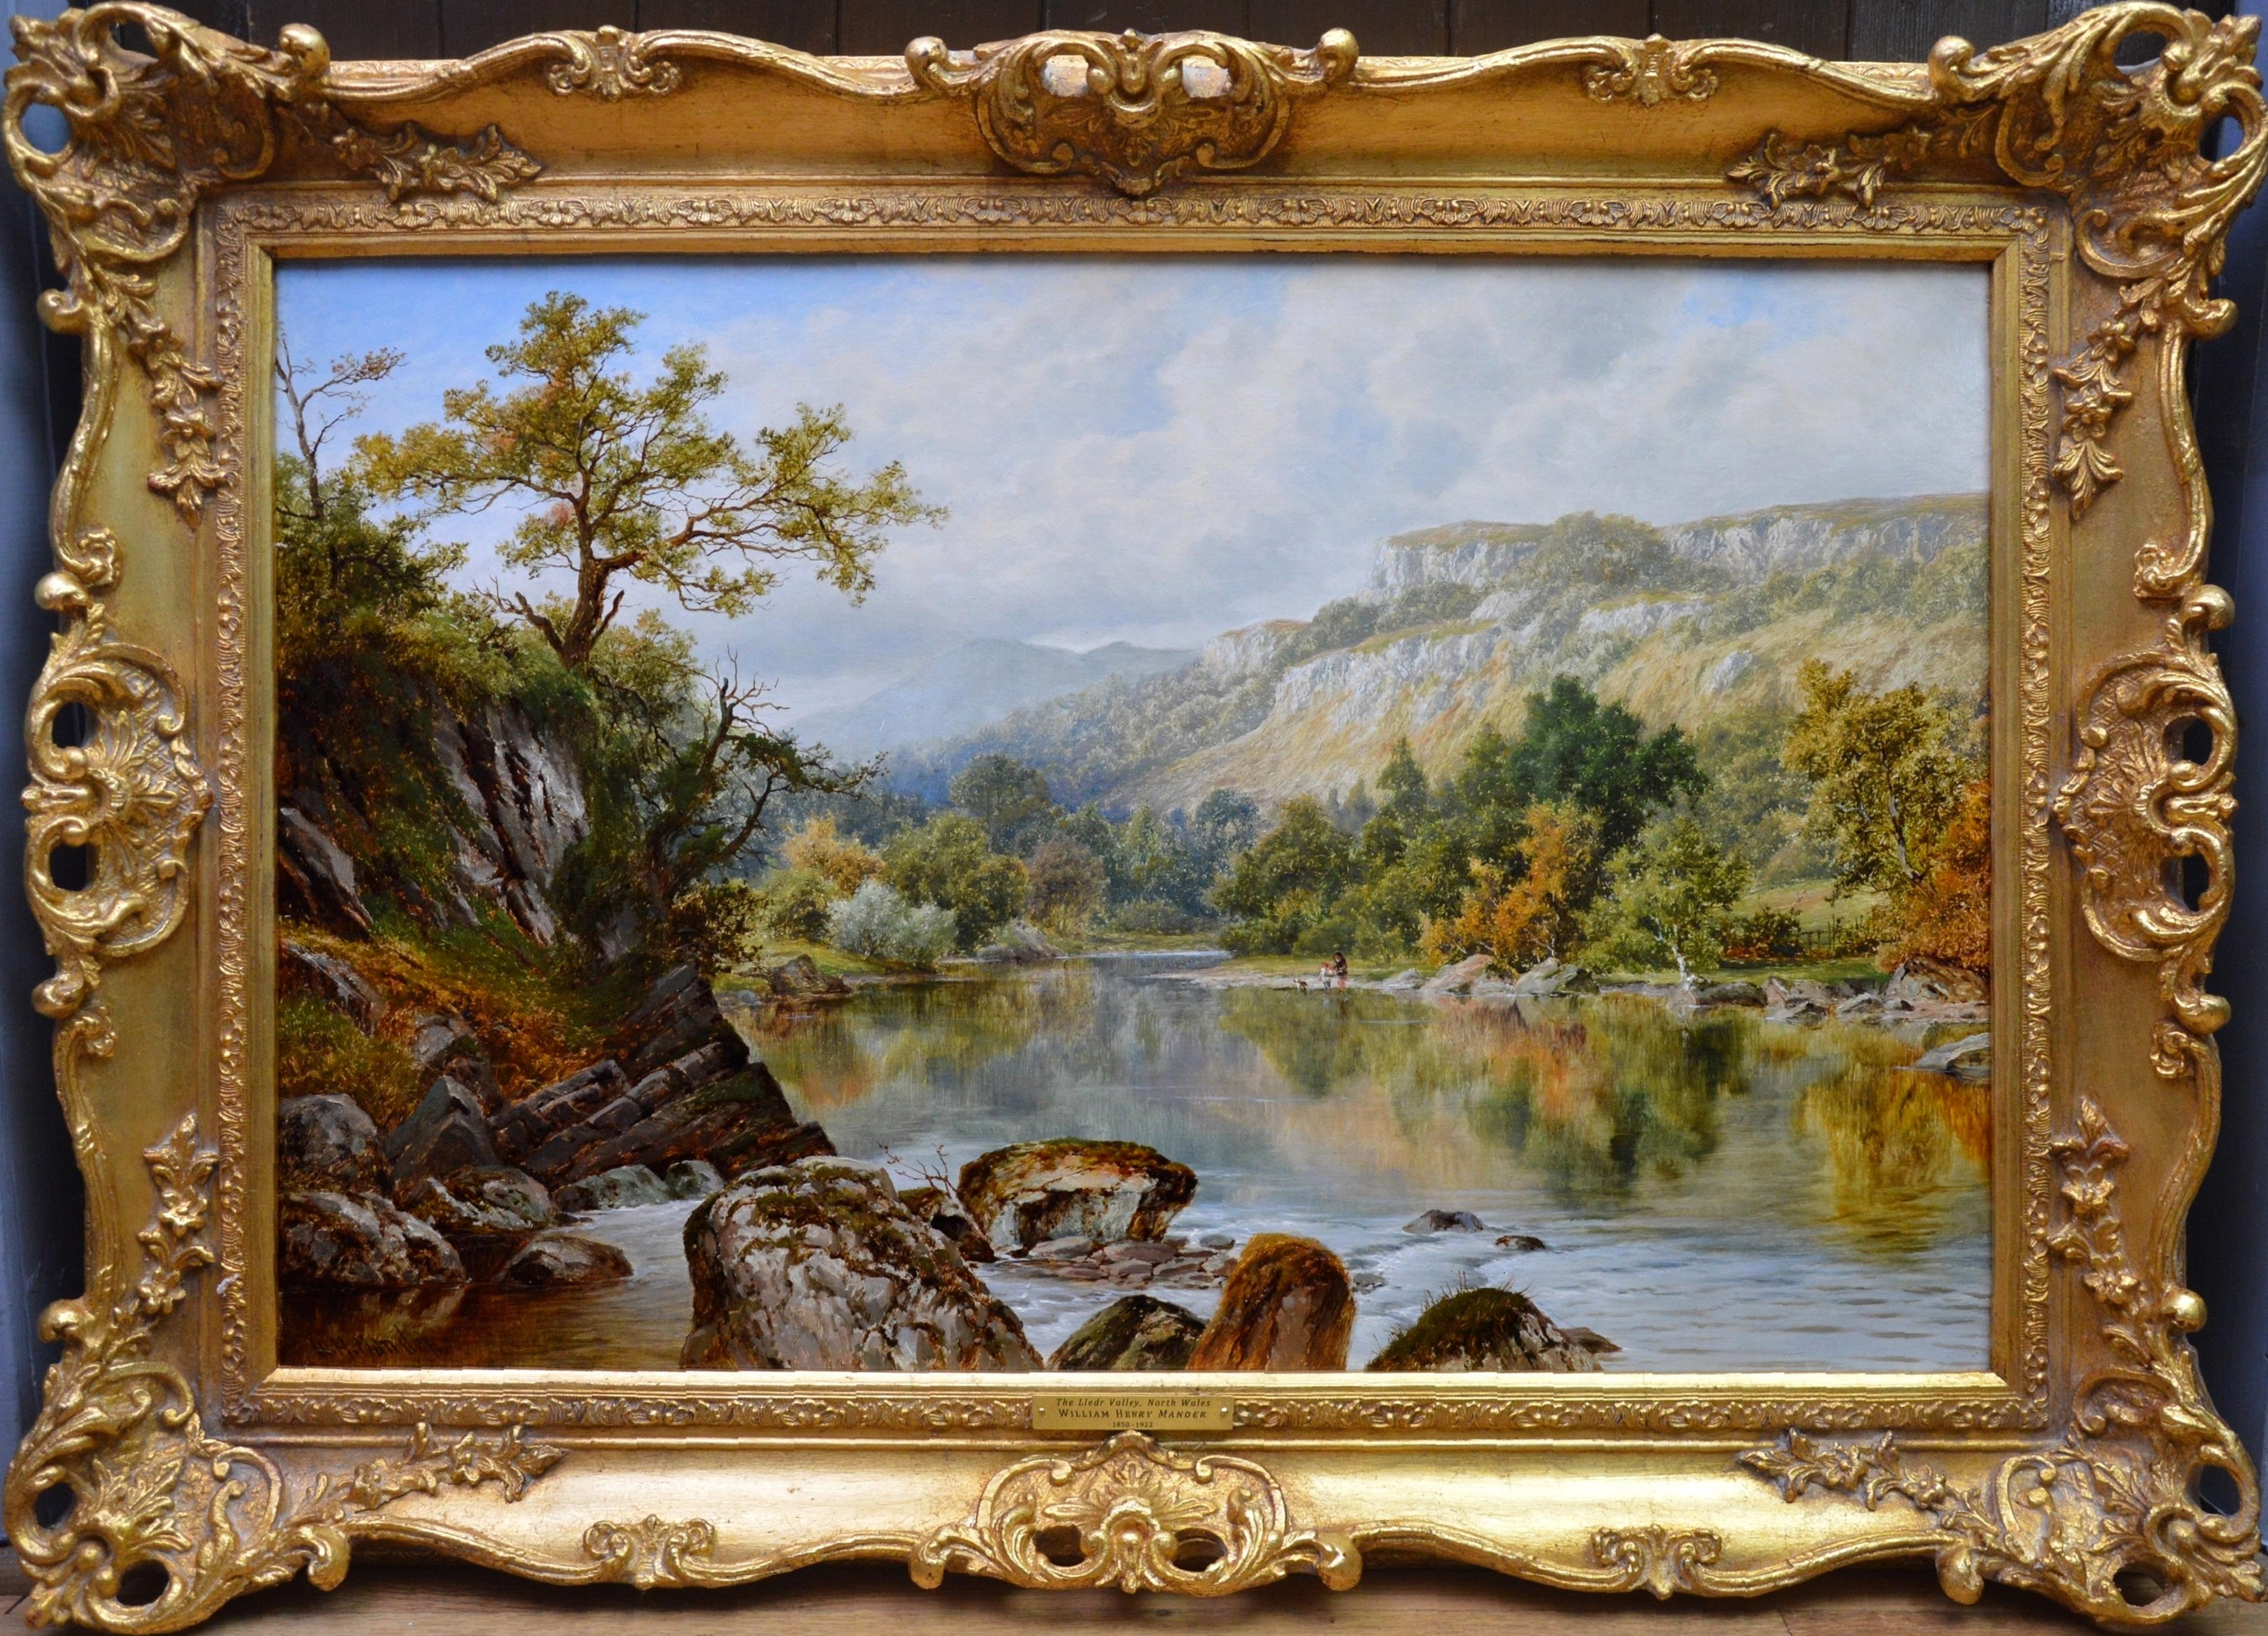 William Henry Mander Landscape Painting - The Lledr Valley, North Wales - 19th Century River Landscape Oil Painting 